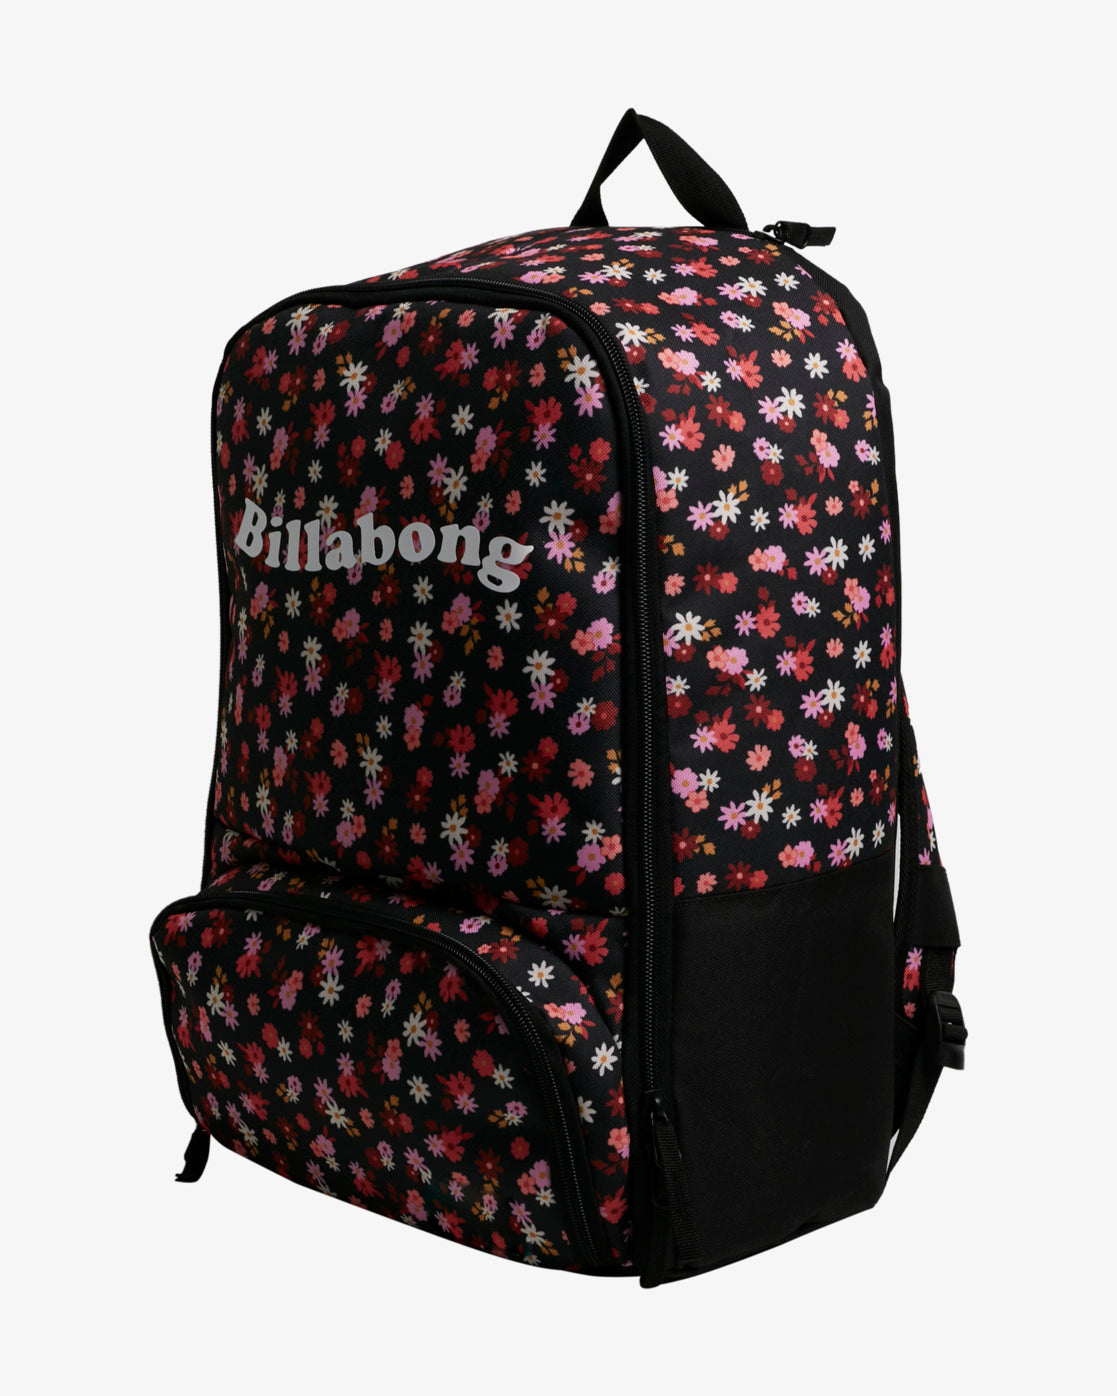 DITSY DREAM BACKPACK